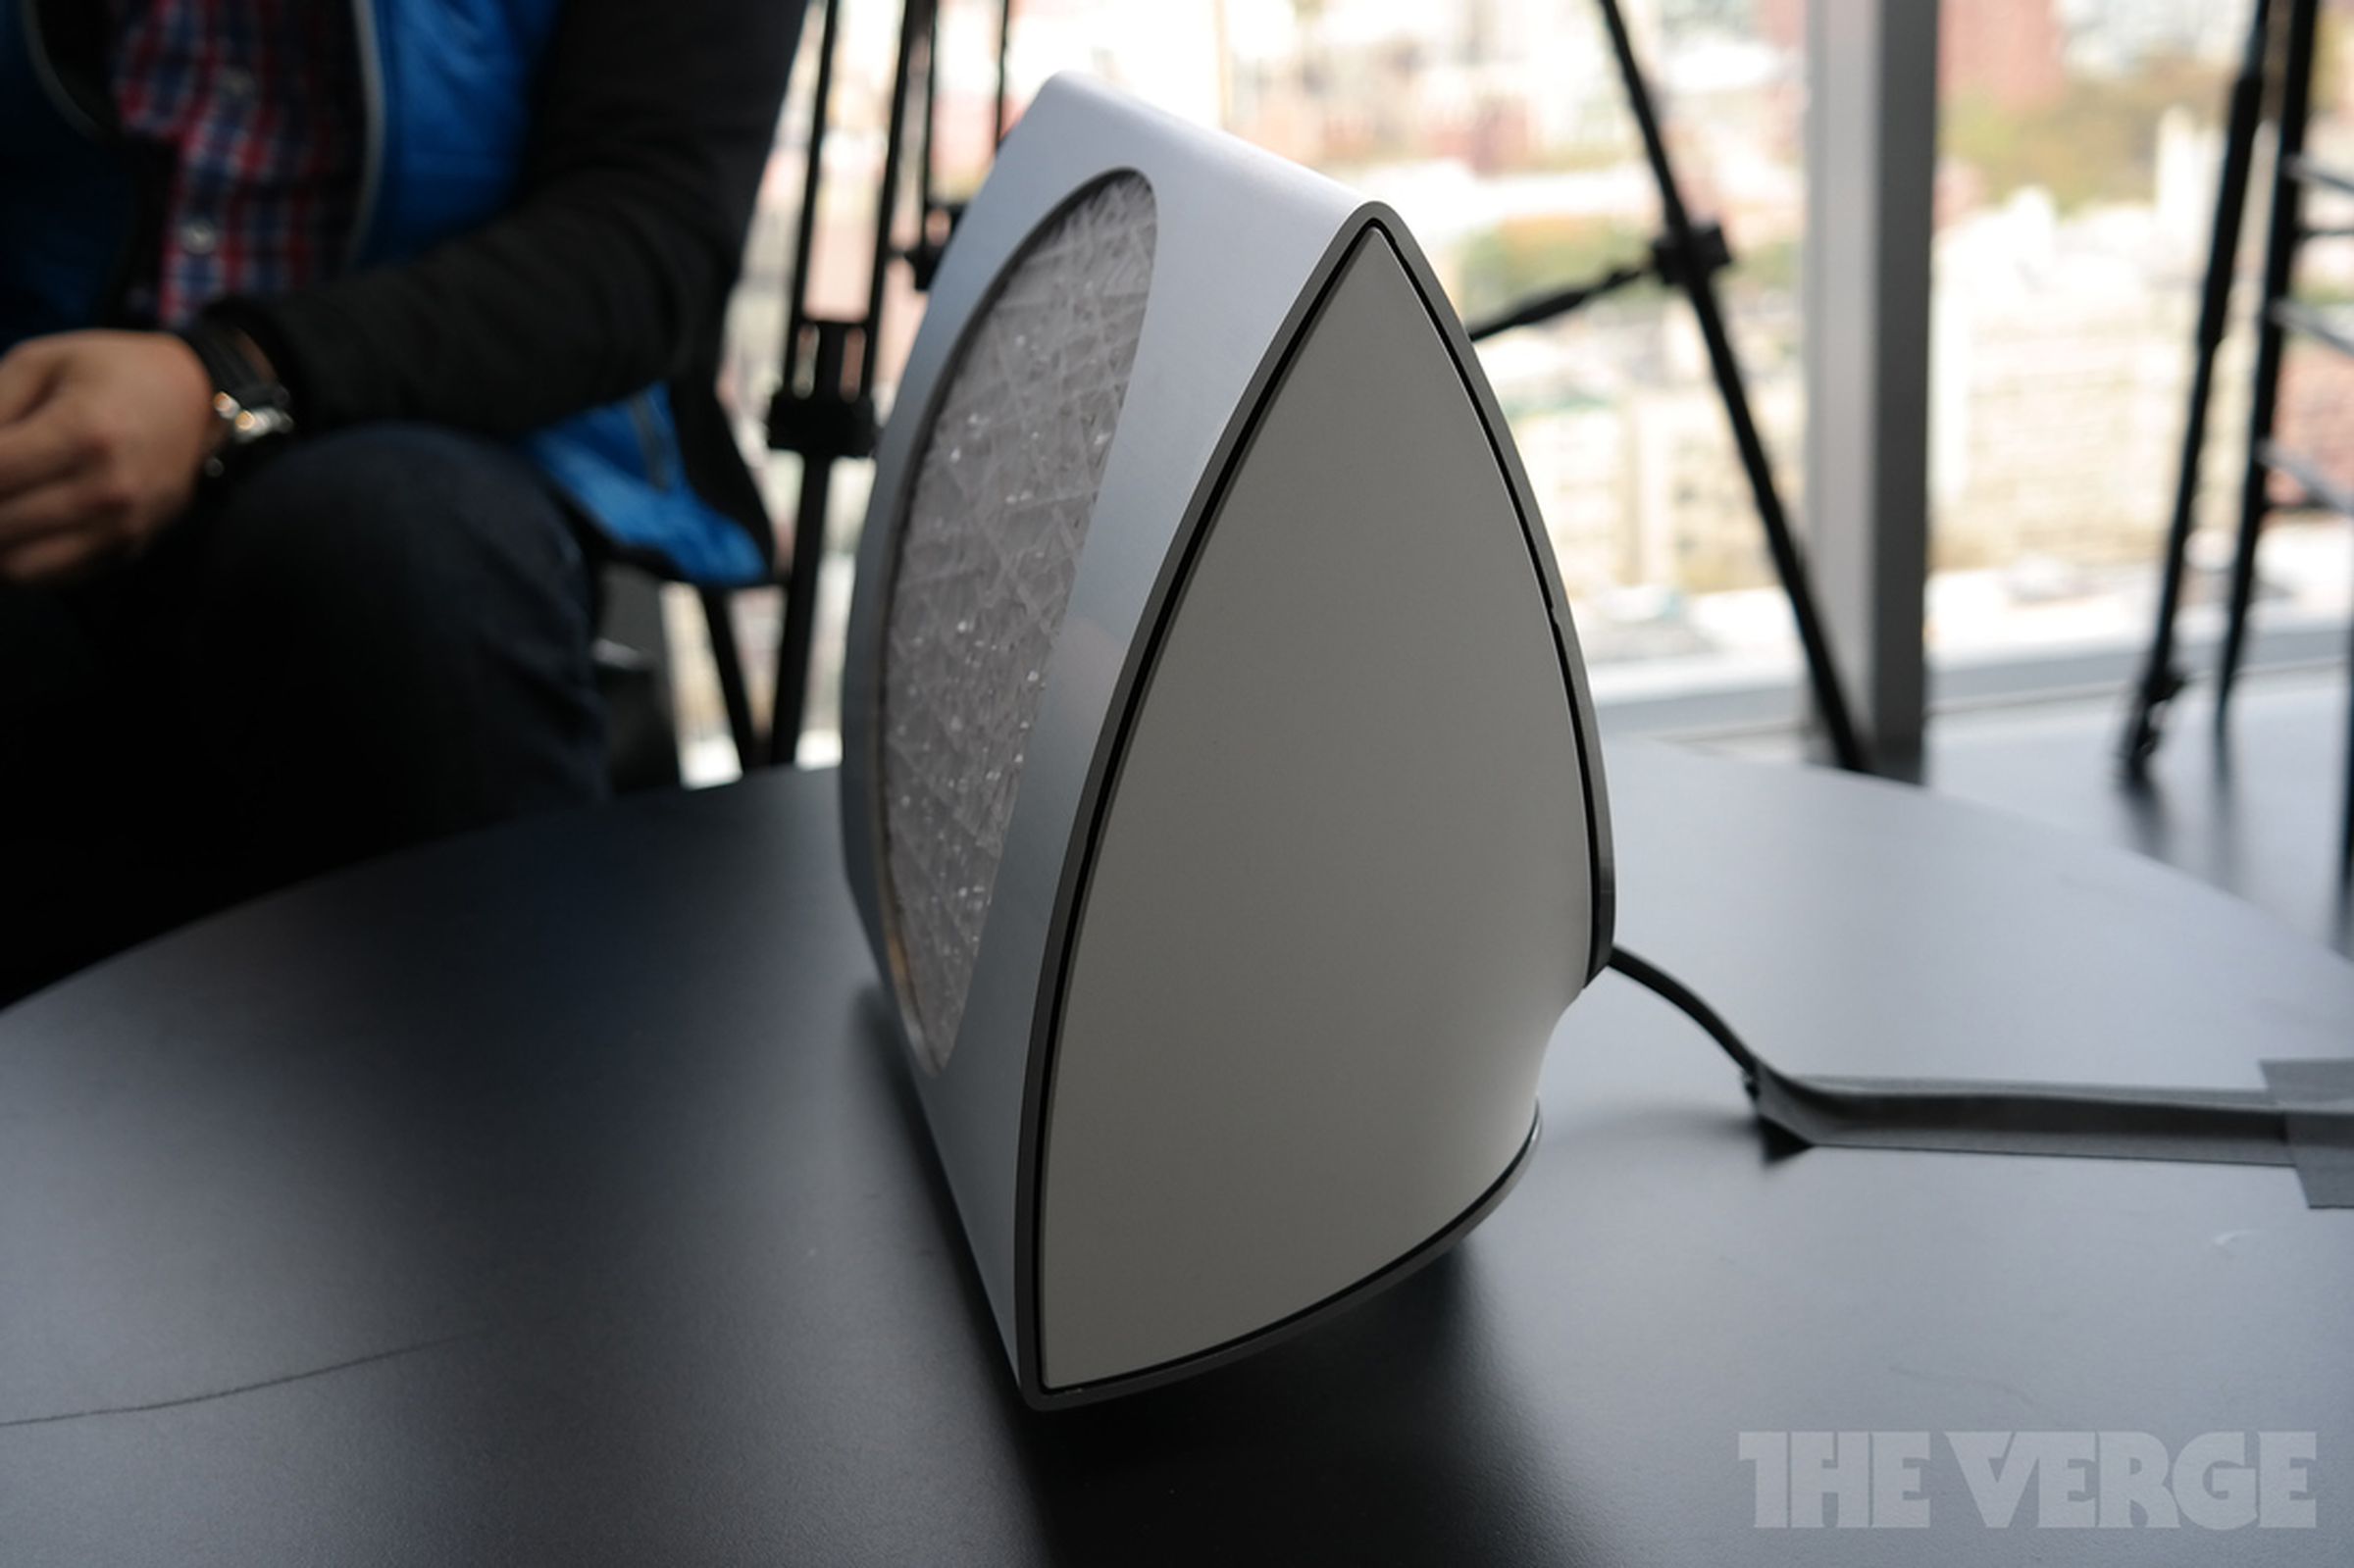 Bang & Olufsen BeoLab wireless speakers photos